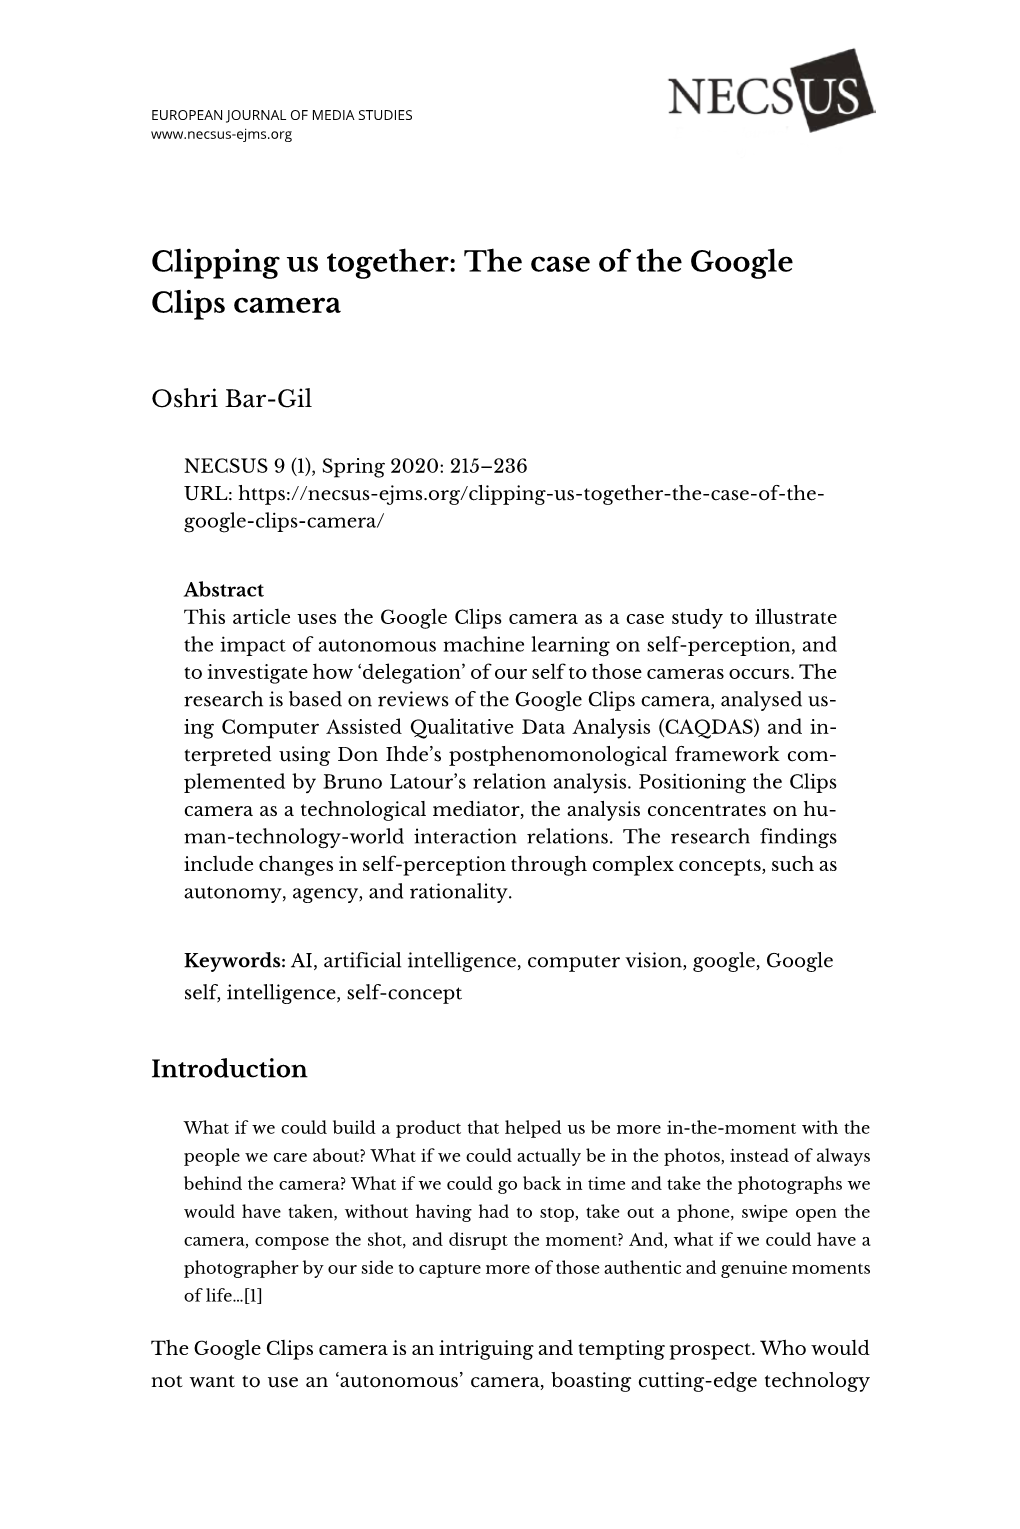 Clipping Us Together: the Case of the Google Clips Camera